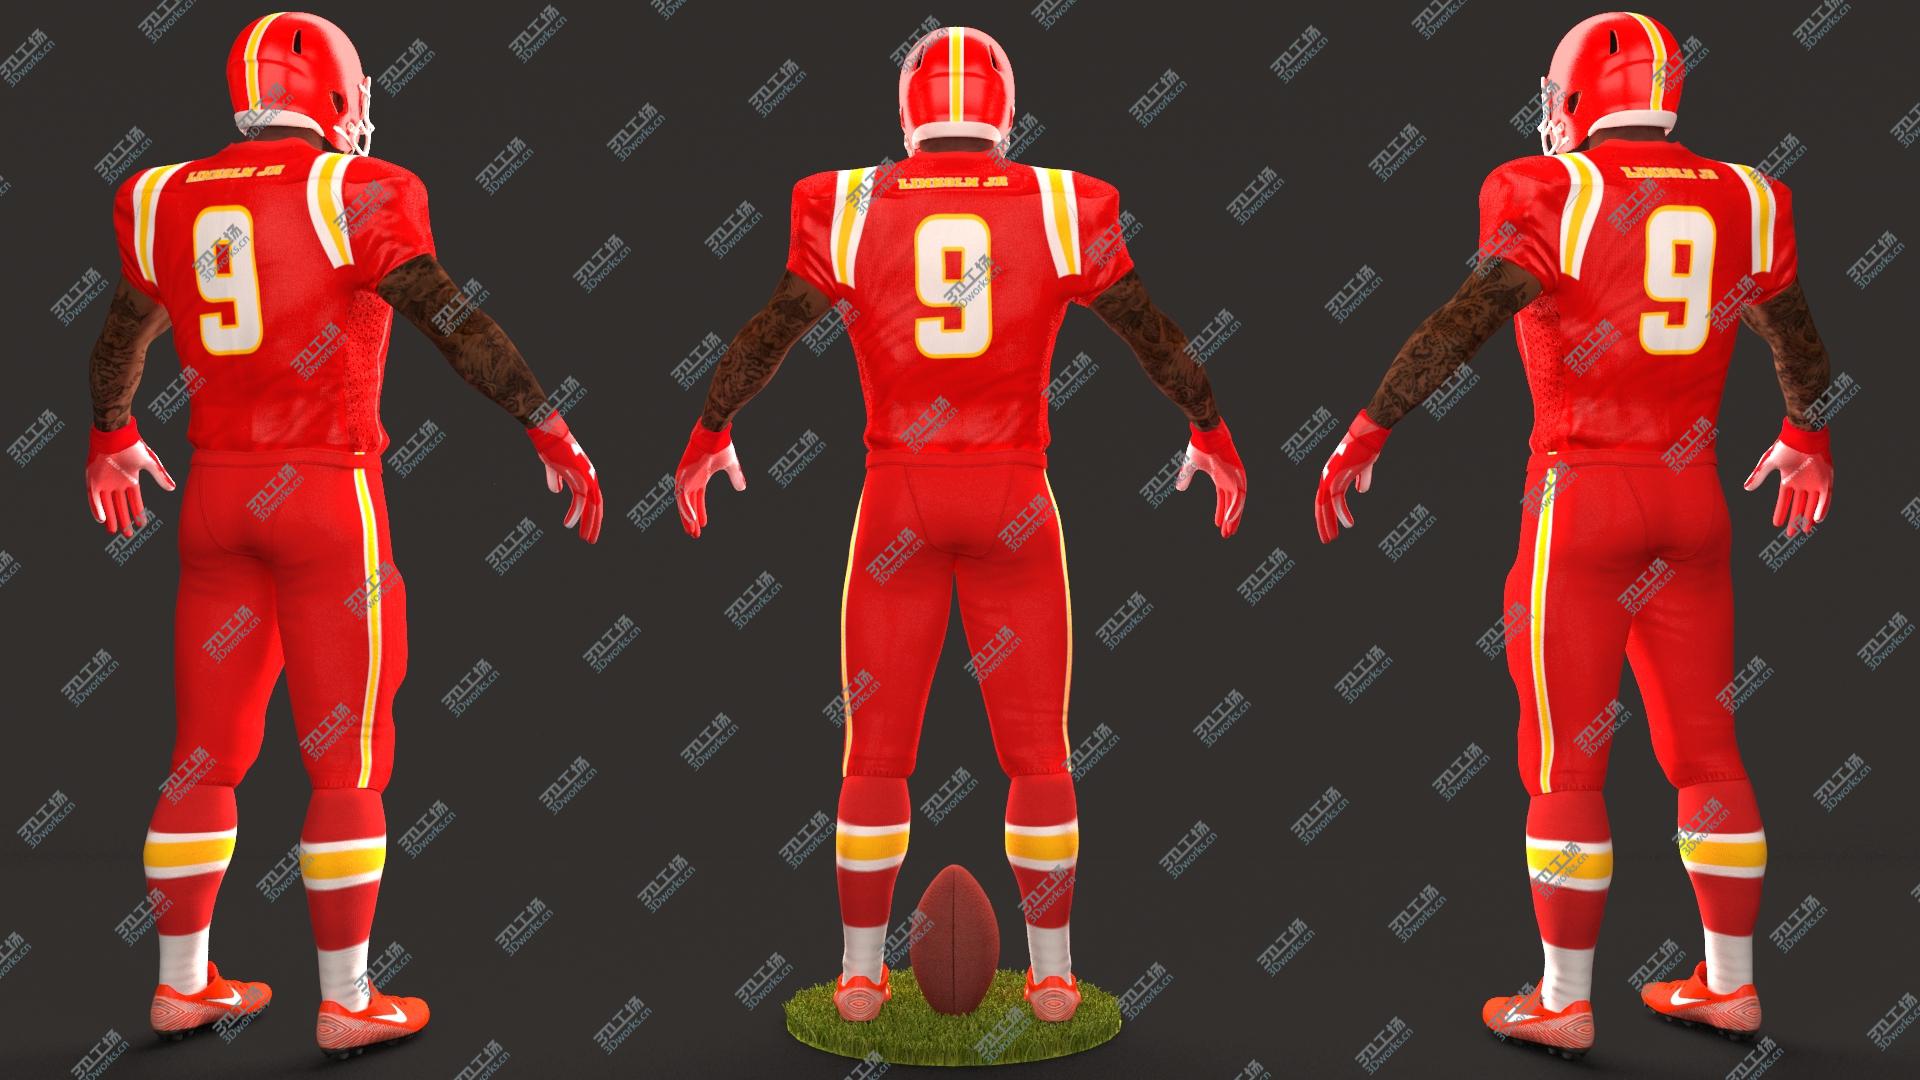 images/goods_img/20210313/American Football Players 2020 PBR Pack model/3.jpg